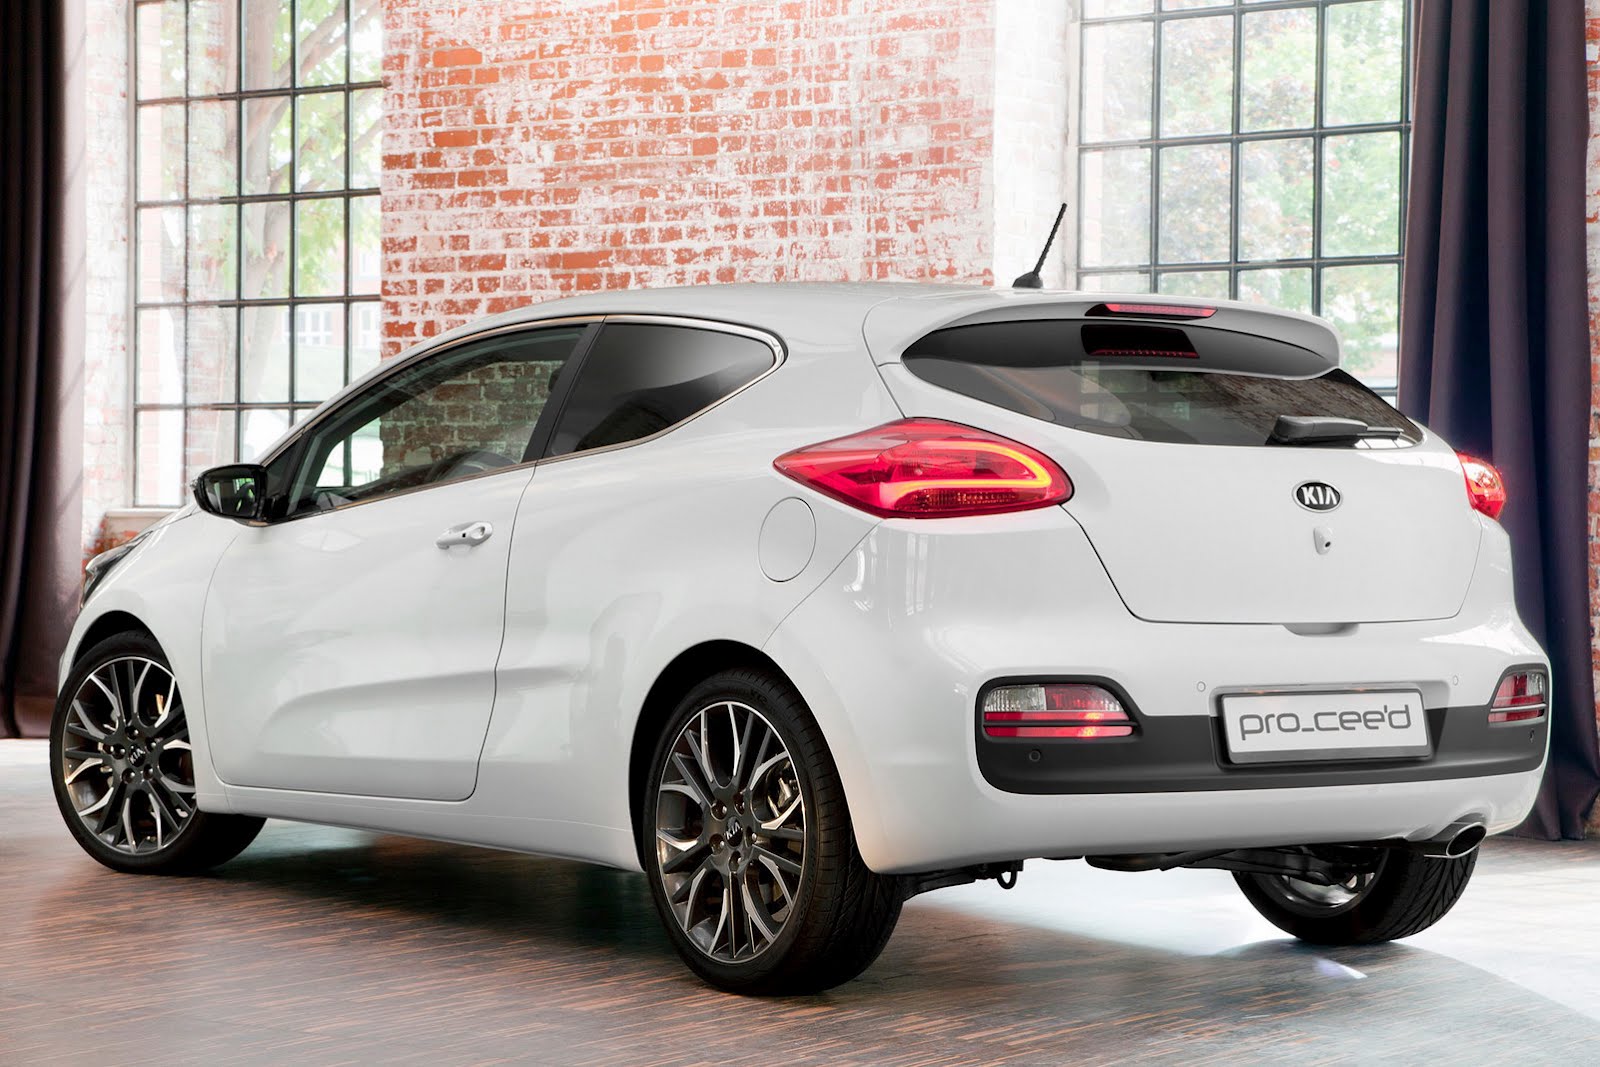 2013 Kia Pro_Cee'd: First Official Images of Three-Door Hatchback